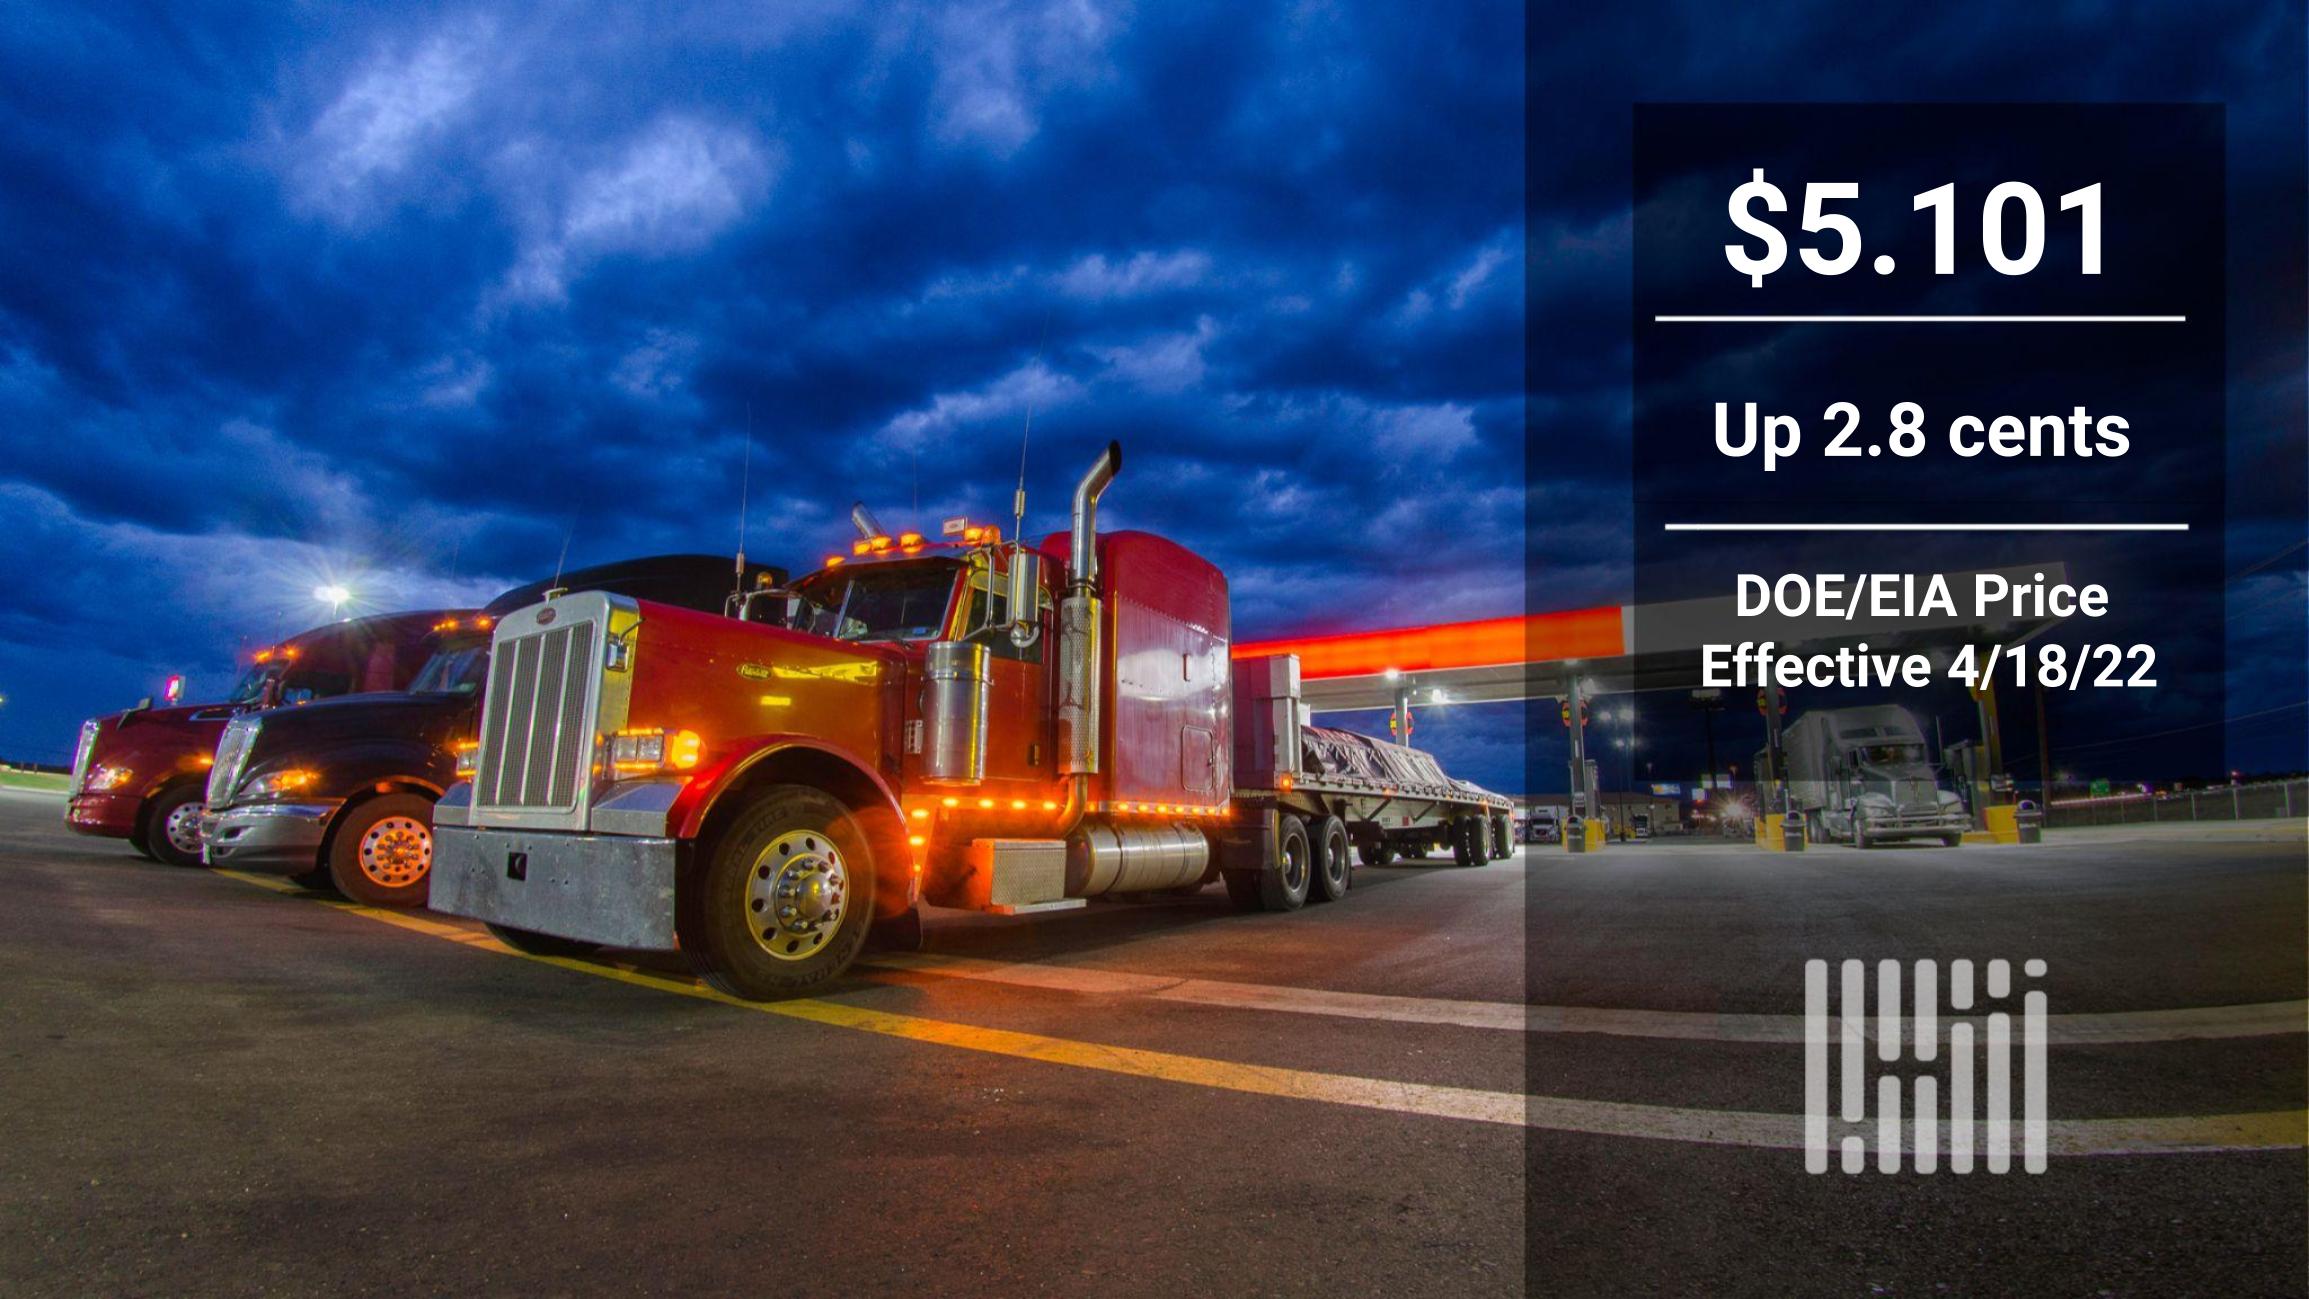 Two red commercial trucks are parked, while text is overlayed showing $5.101 to indicate the price of retail diesel.